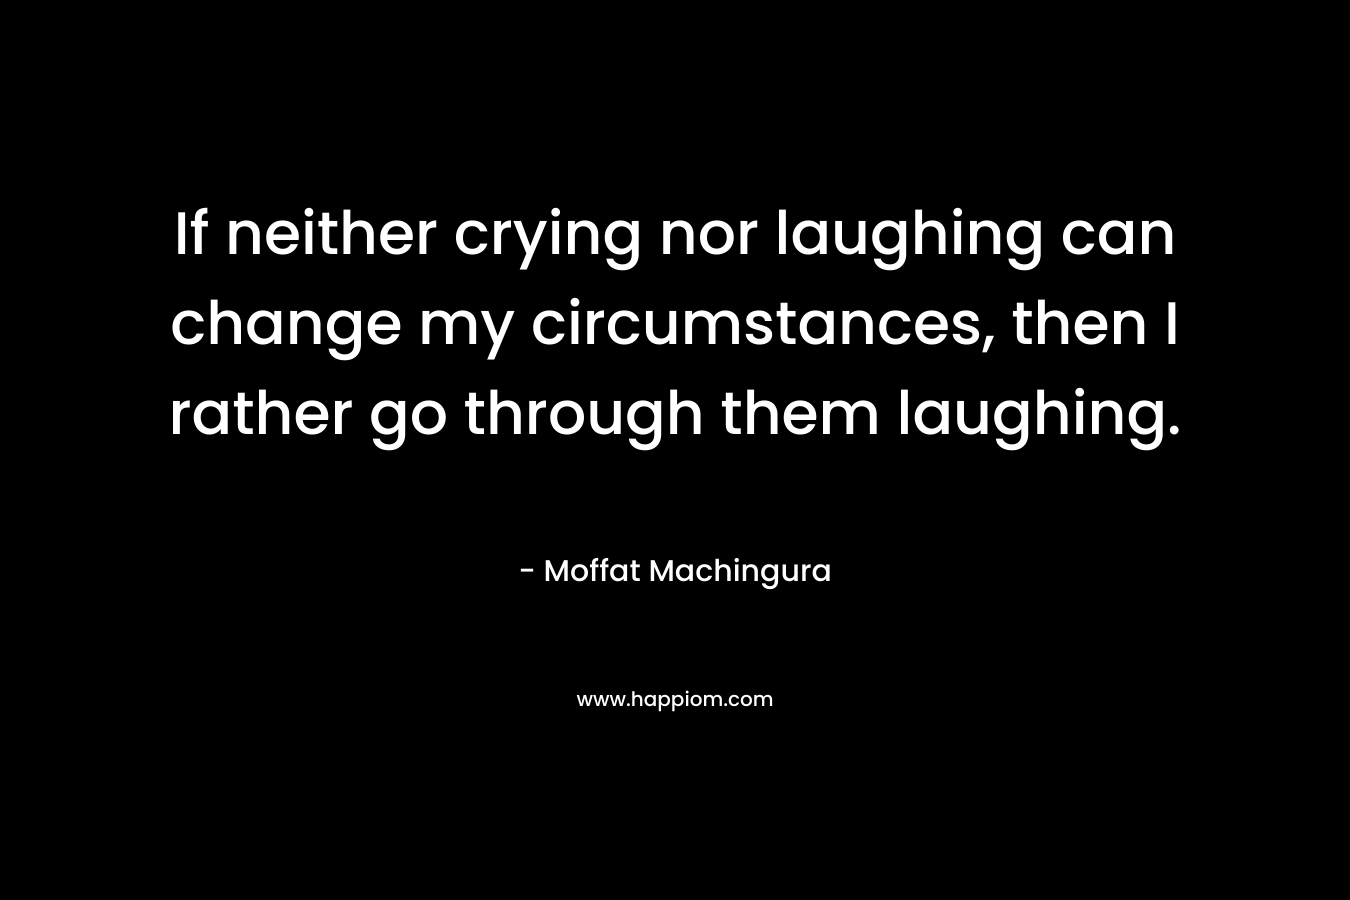 If neither crying nor laughing can change my circumstances, then I rather go through them laughing.